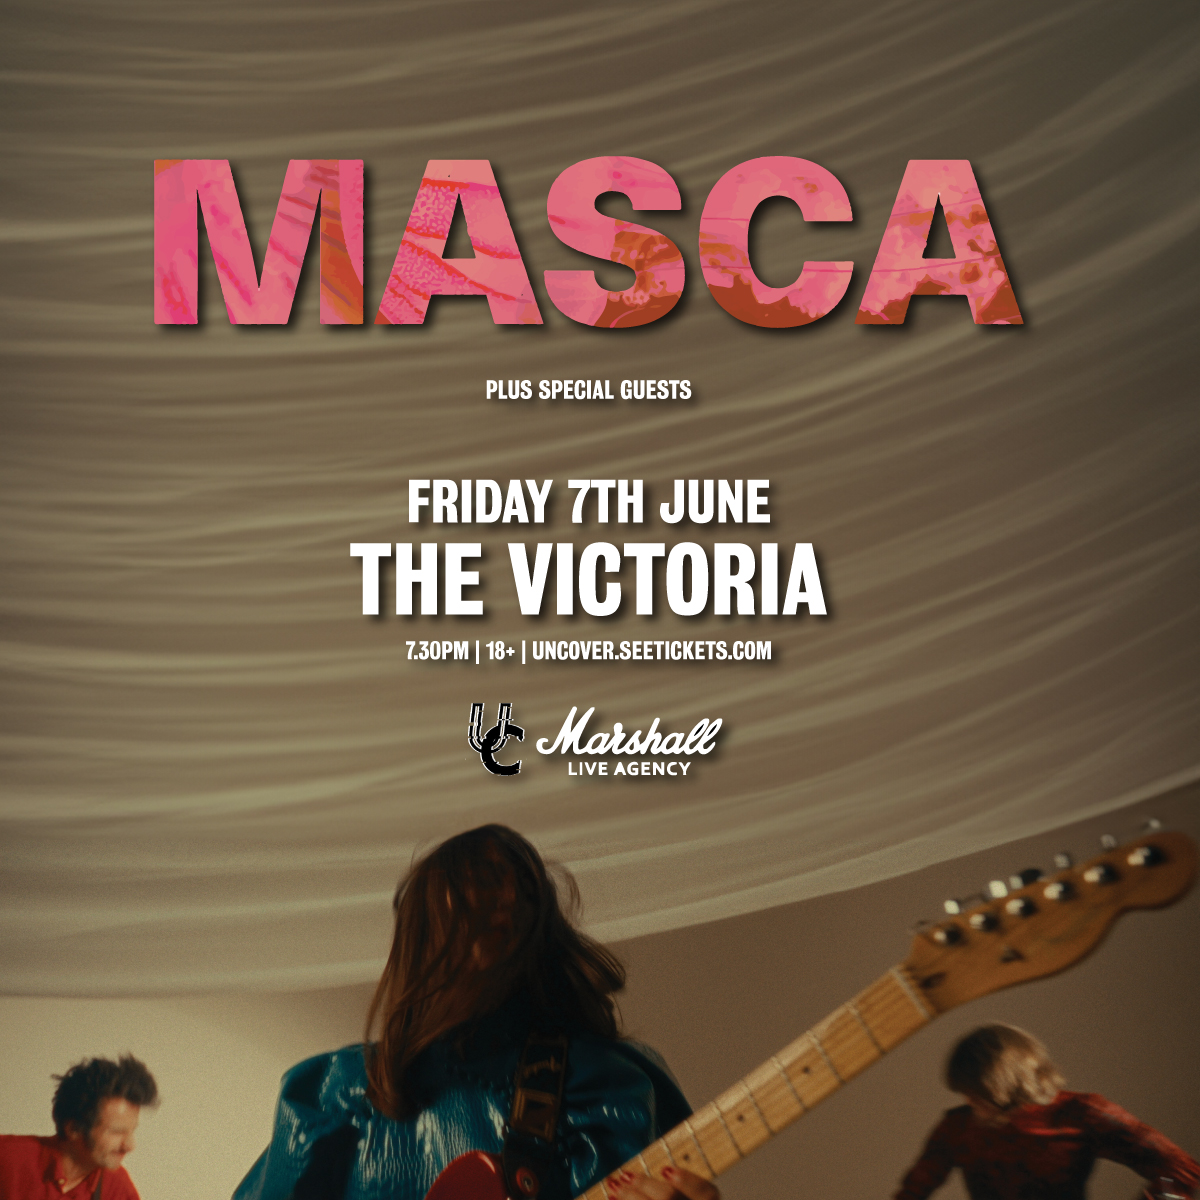 NEW SHOW 💙 Catchy pop rockers Masca are set to headline @TheVictoria, Birmingham, on Friday, 7th June 💥 Tickets on sale now: bit.ly/3Q8gWnZ